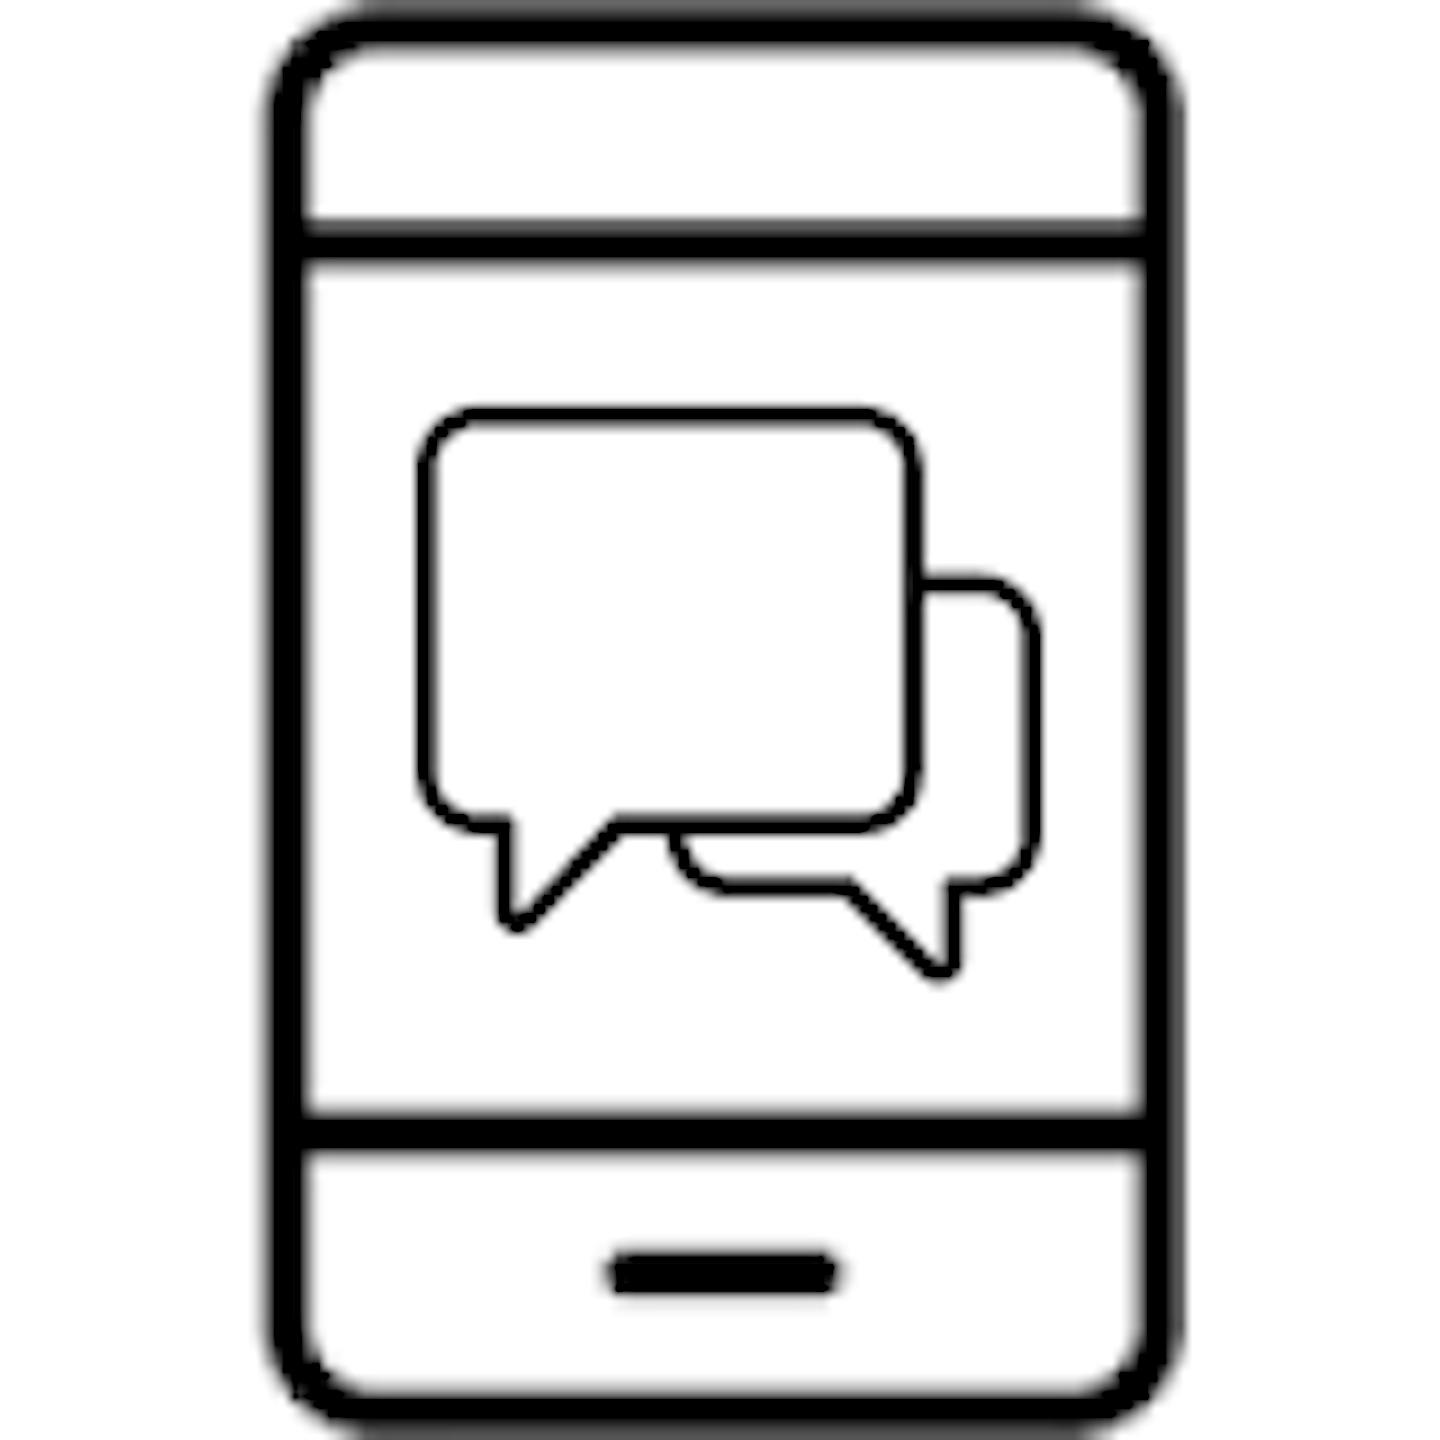 chat-cell-phone-logo.png